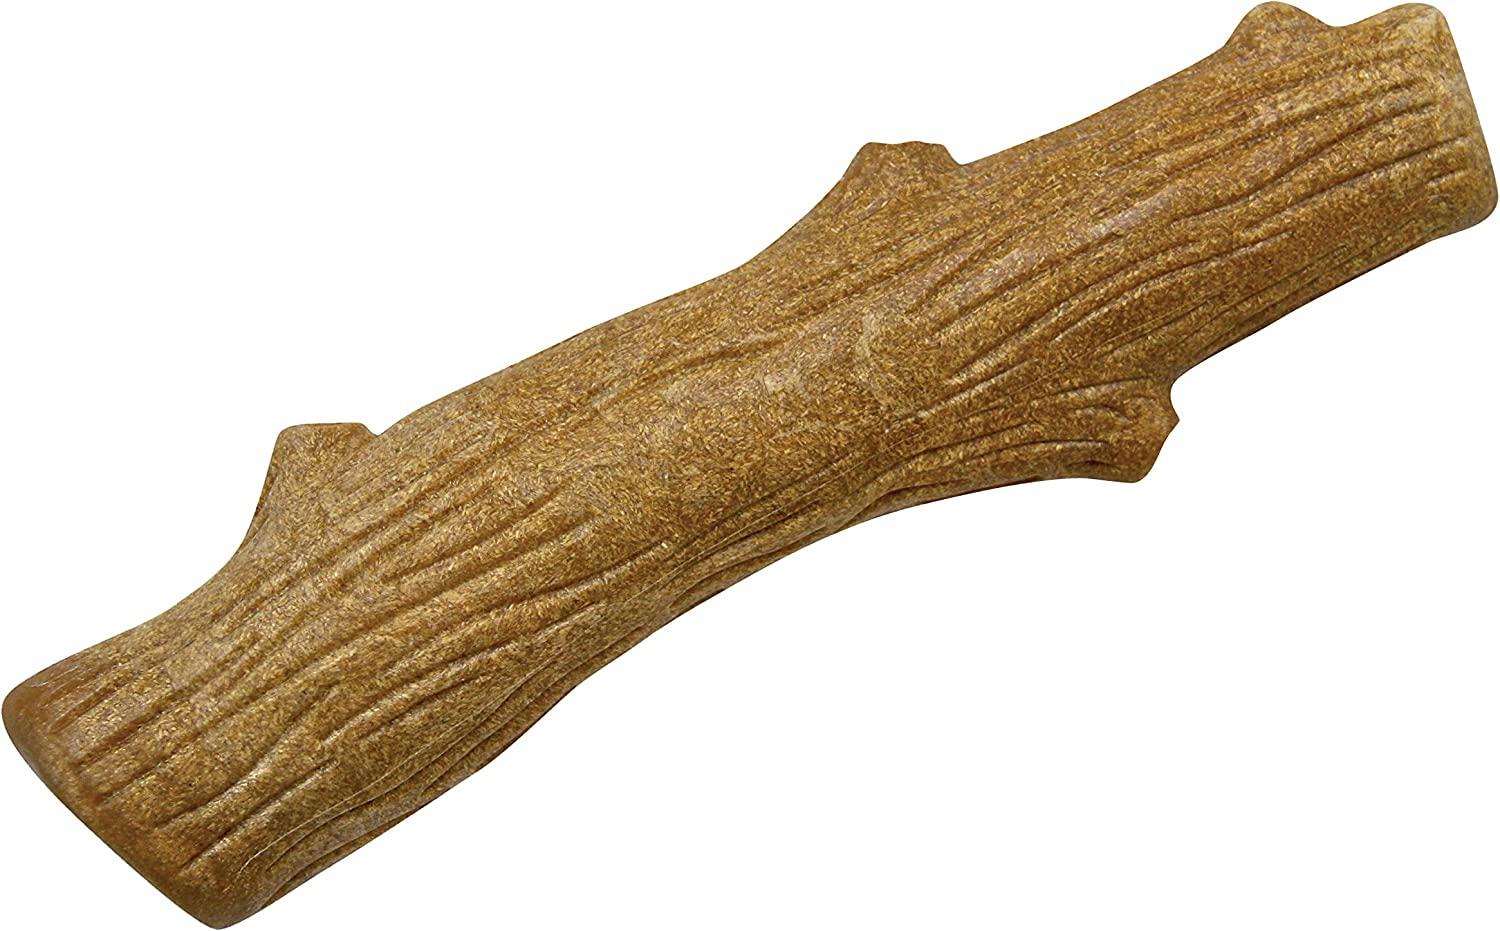 Petstages Dogwood Wood Alternative Dog Chew Toy for $5.26 Shipped